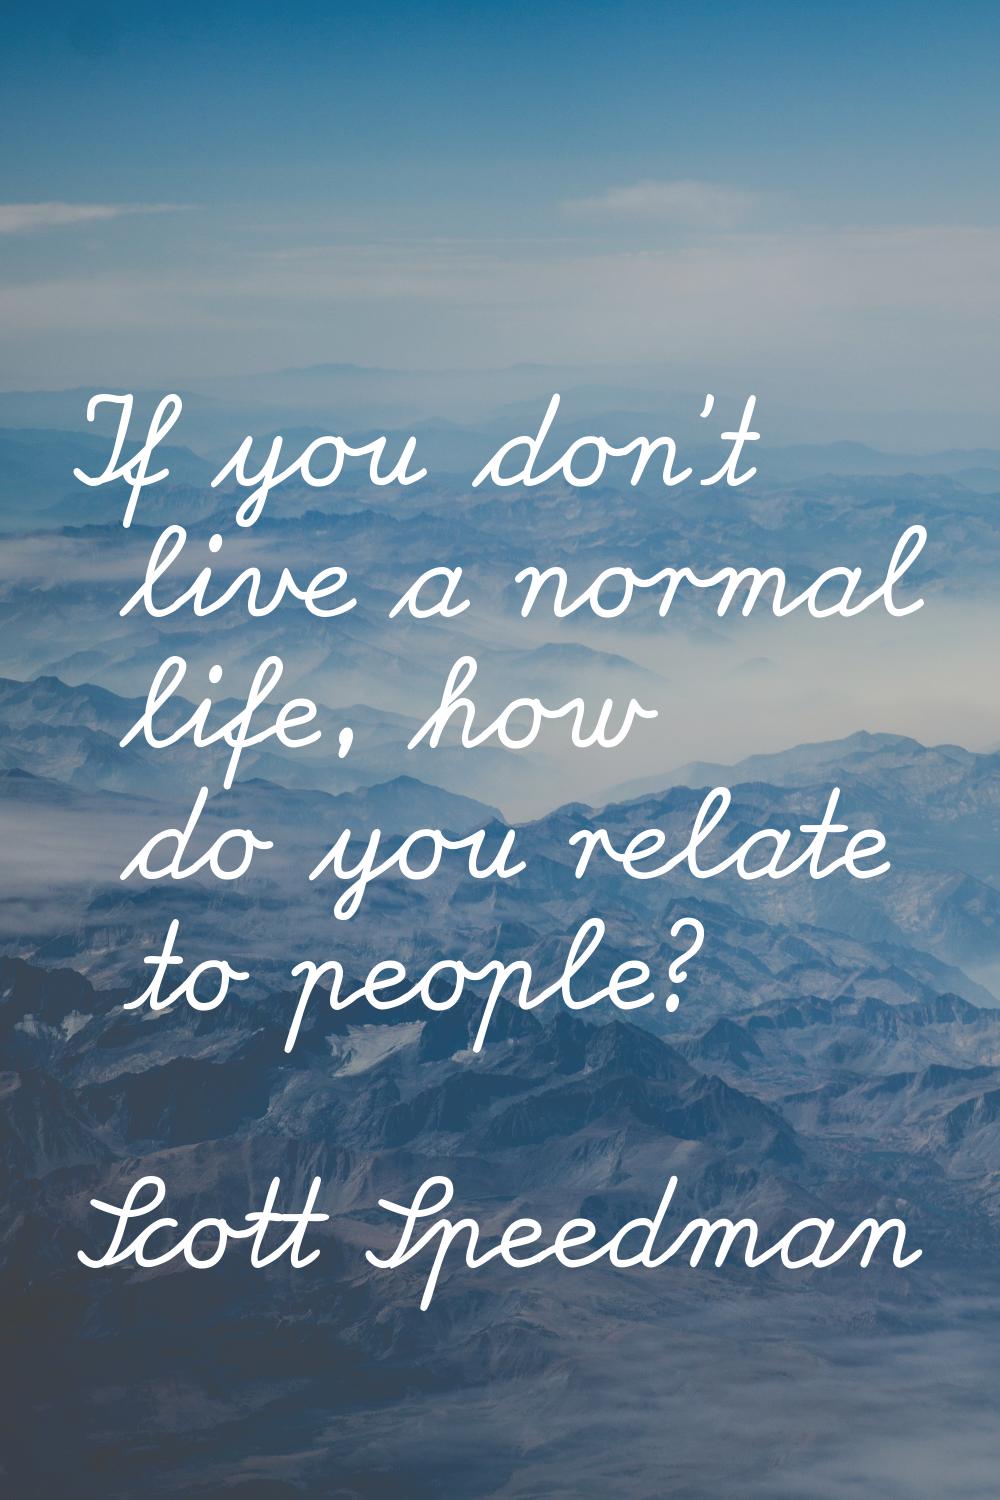 If you don't live a normal life, how do you relate to people?